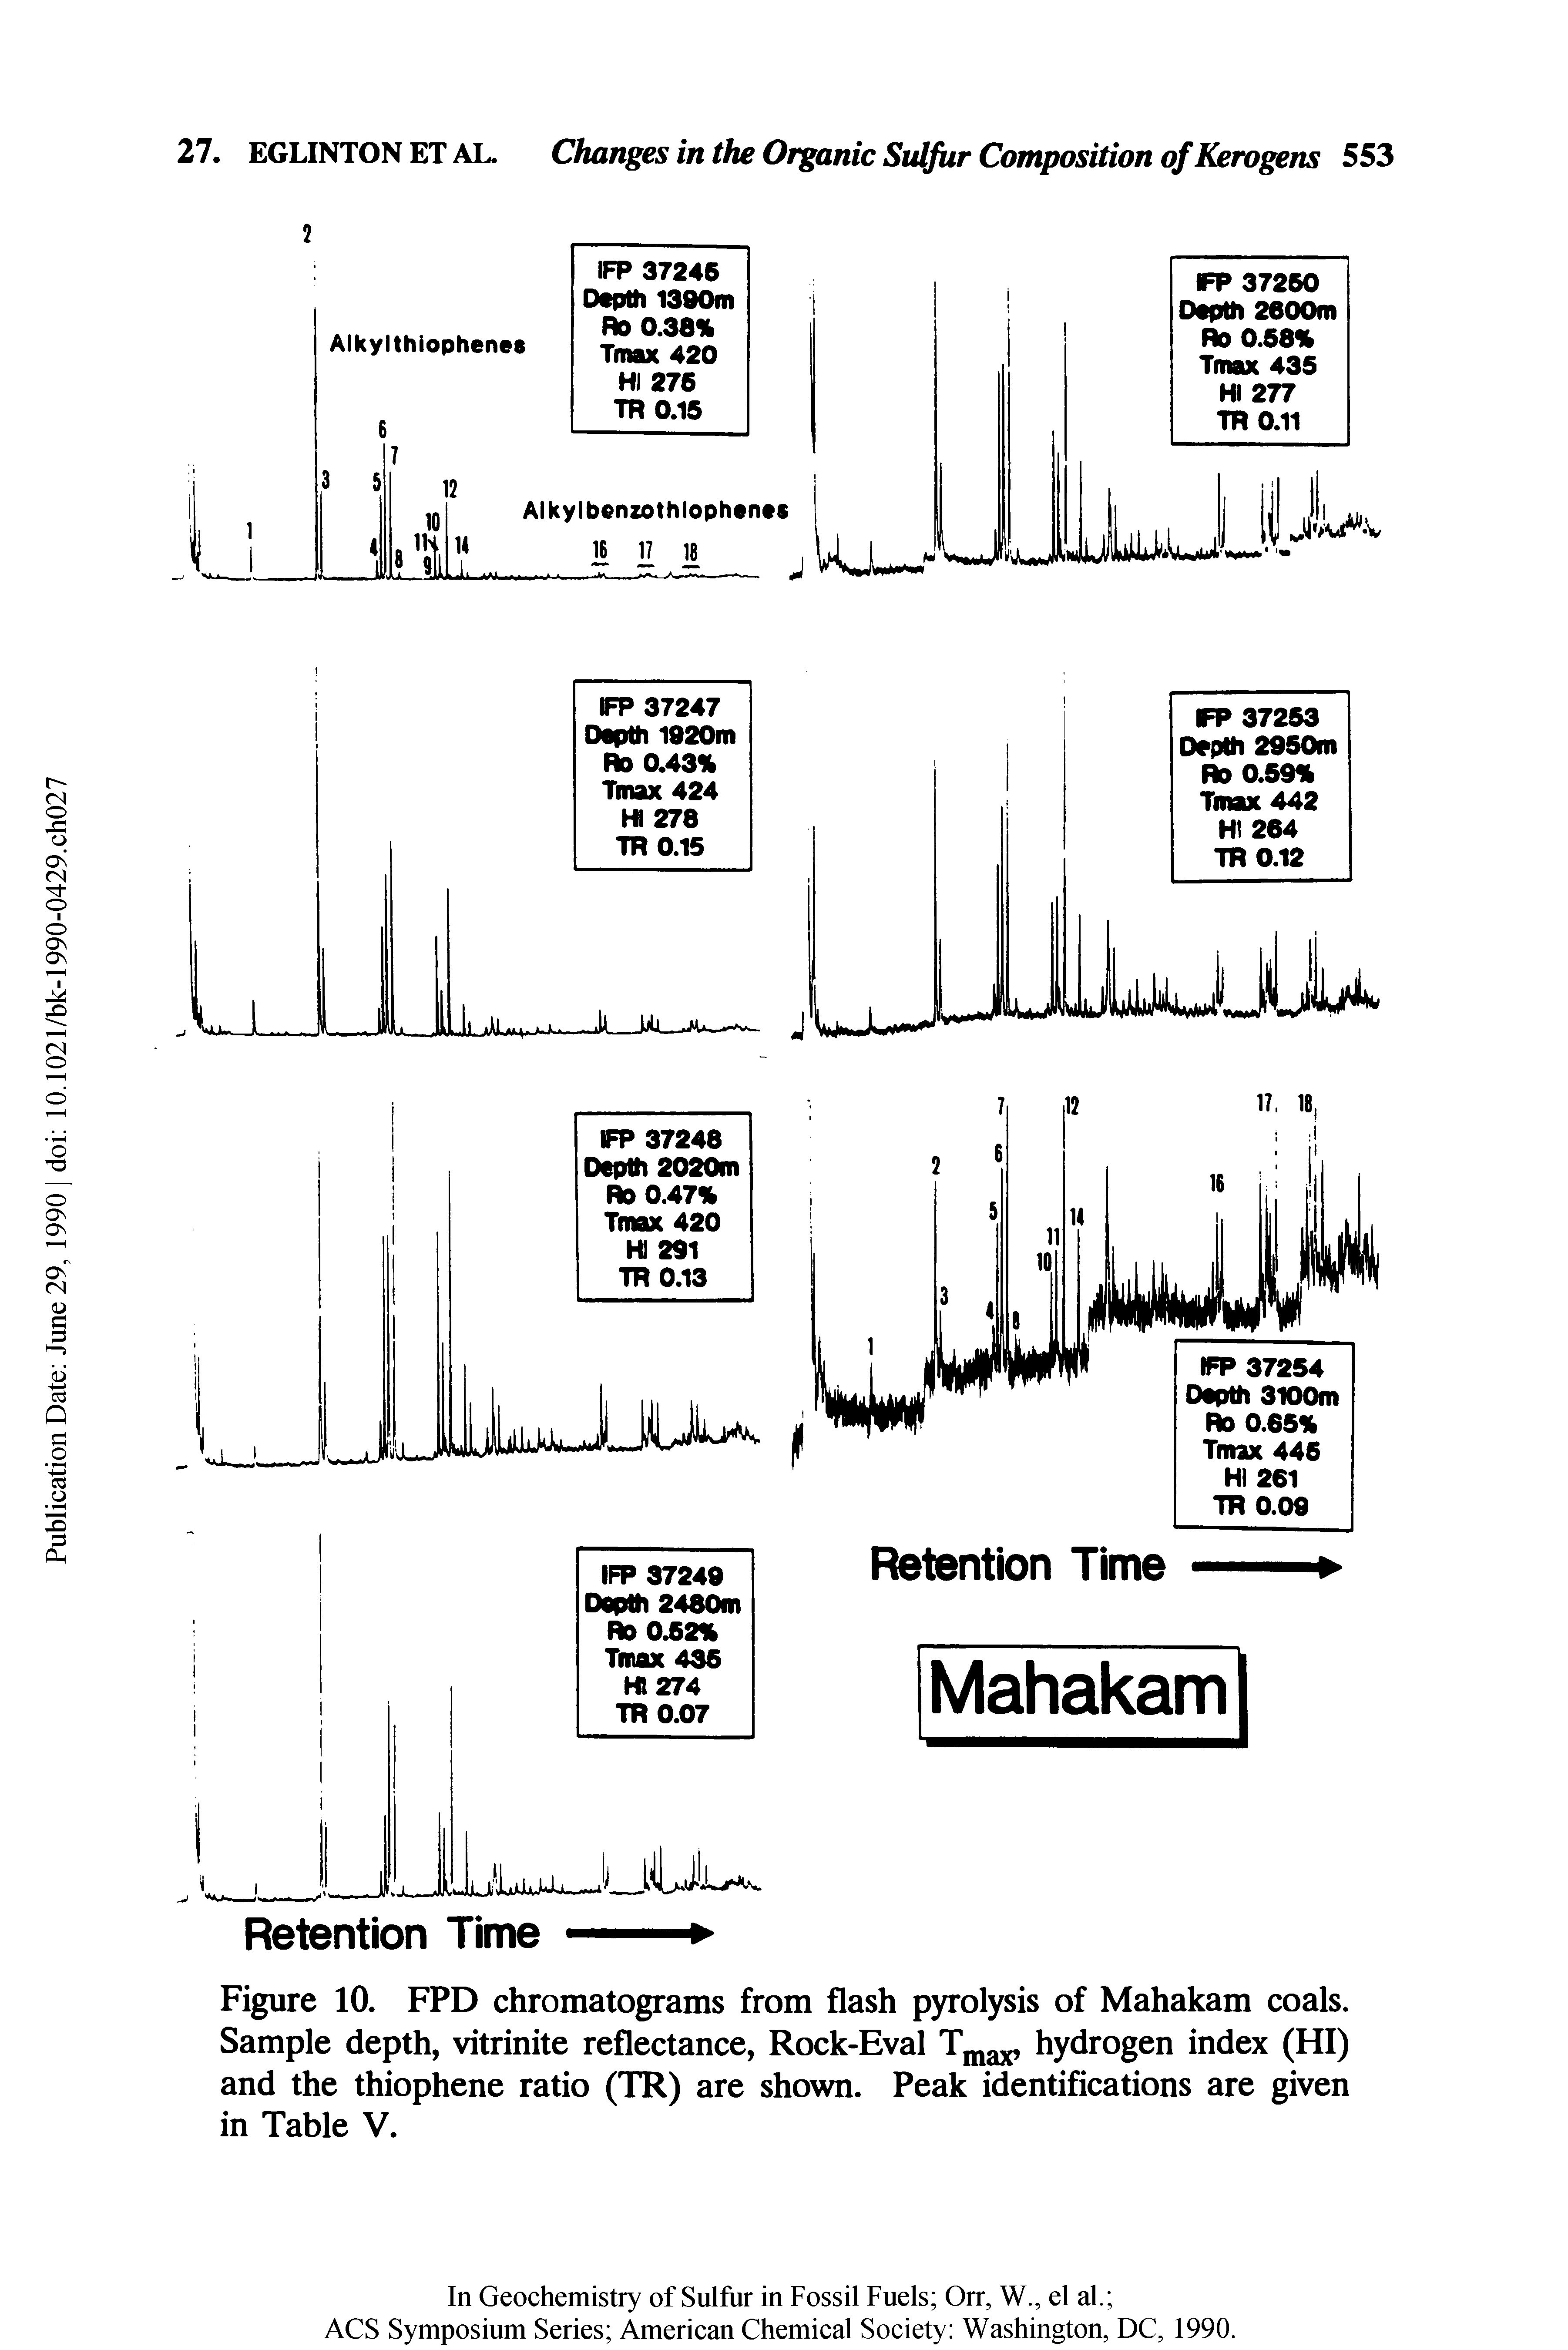 Figure 10. FPD chromatograms from flash pyrolysis of Mahakam coals. Sample depth, vitrinite reflectance, Rock-Eval Tmax, hydrogen index (HI) and the thiophene ratio (TR) are shown. Peak identifications are given in Table V.